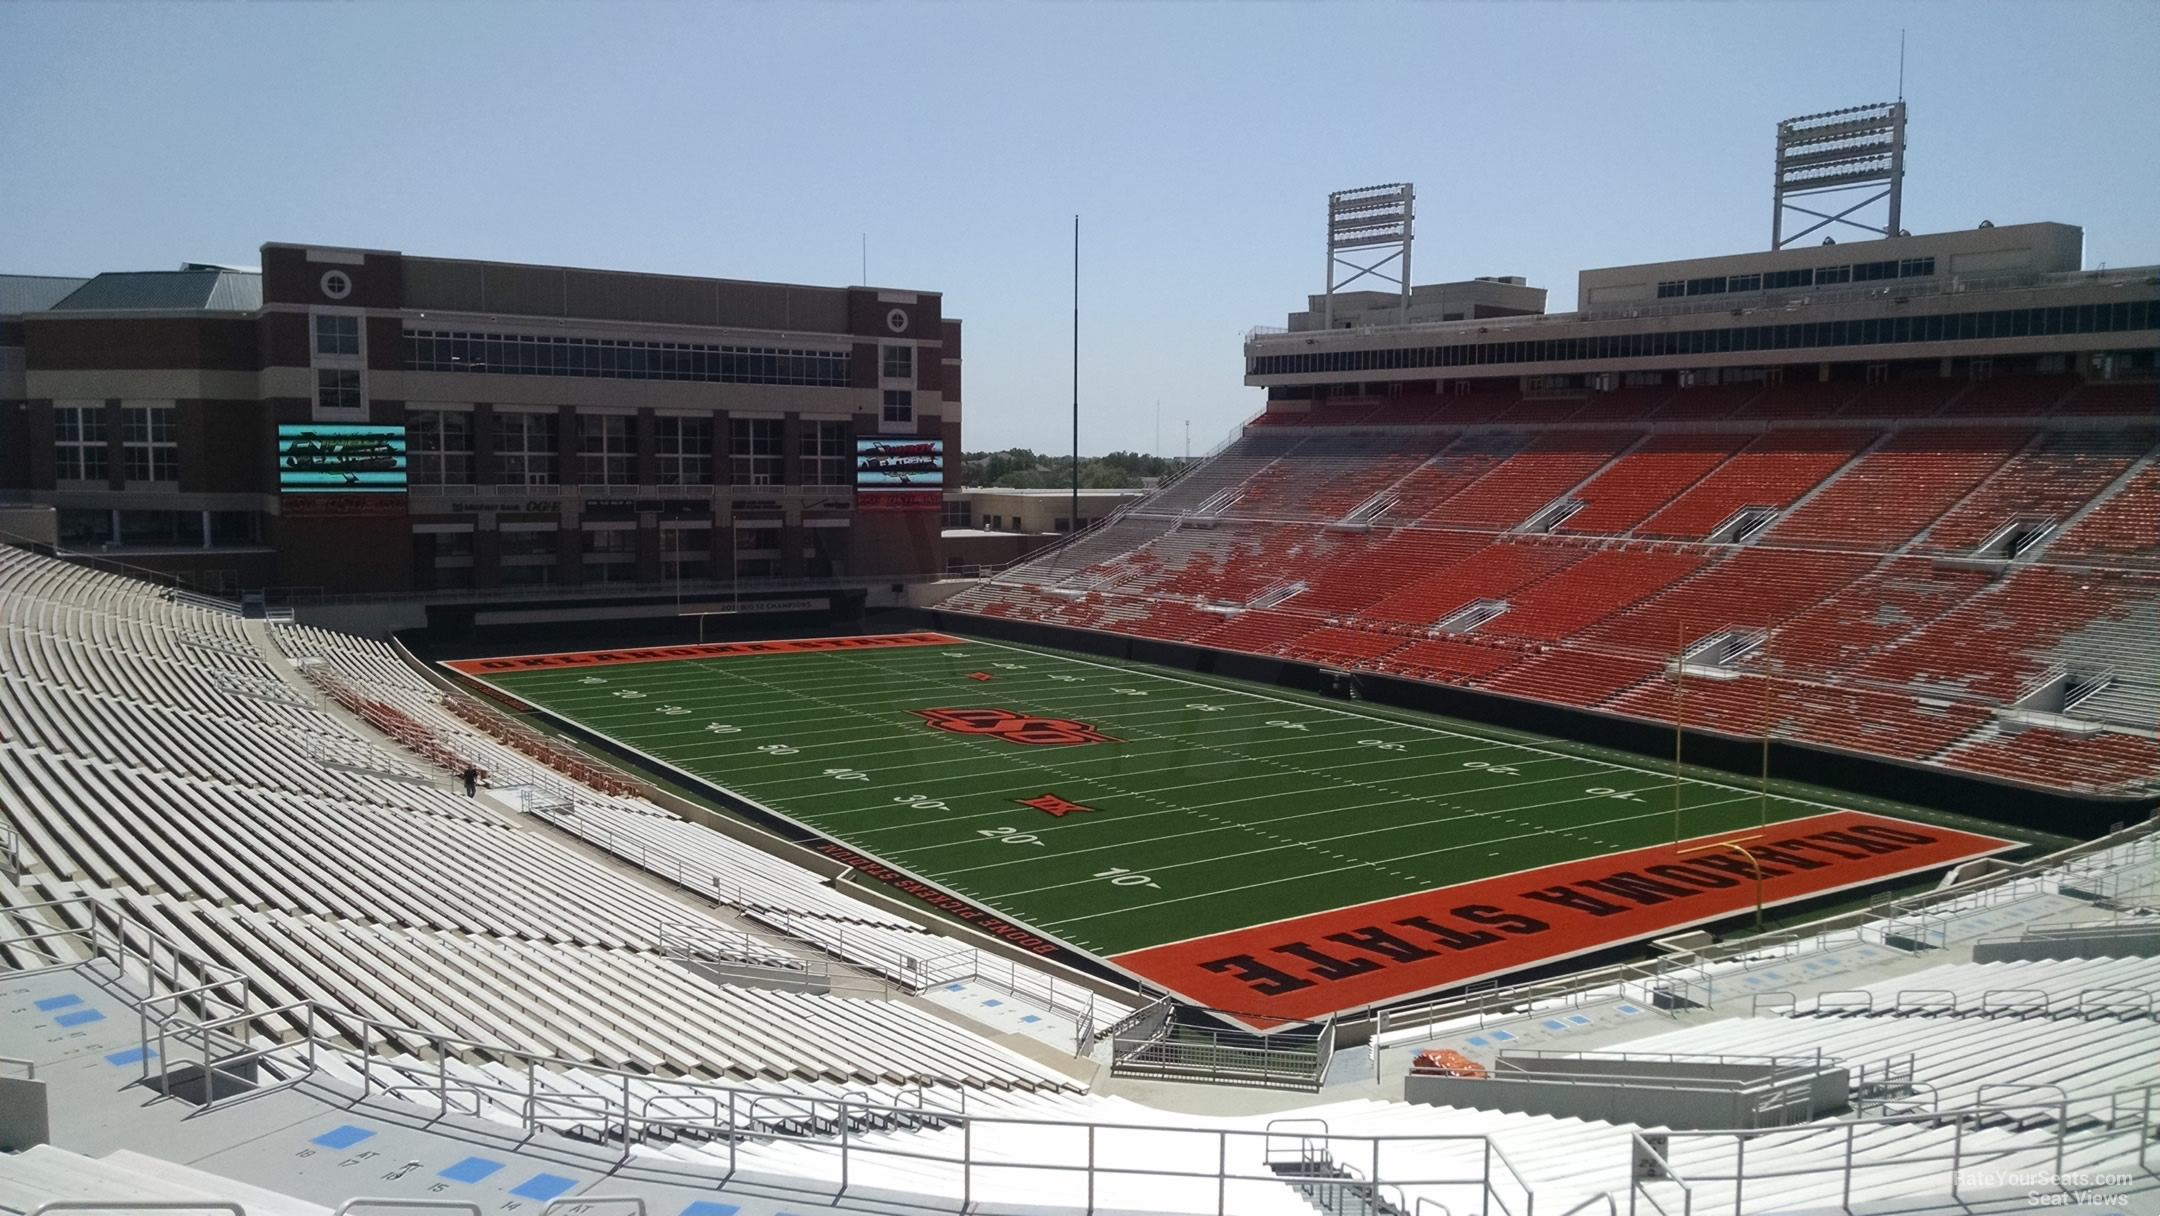 section 325, row 19 seat view  - boone pickens stadium